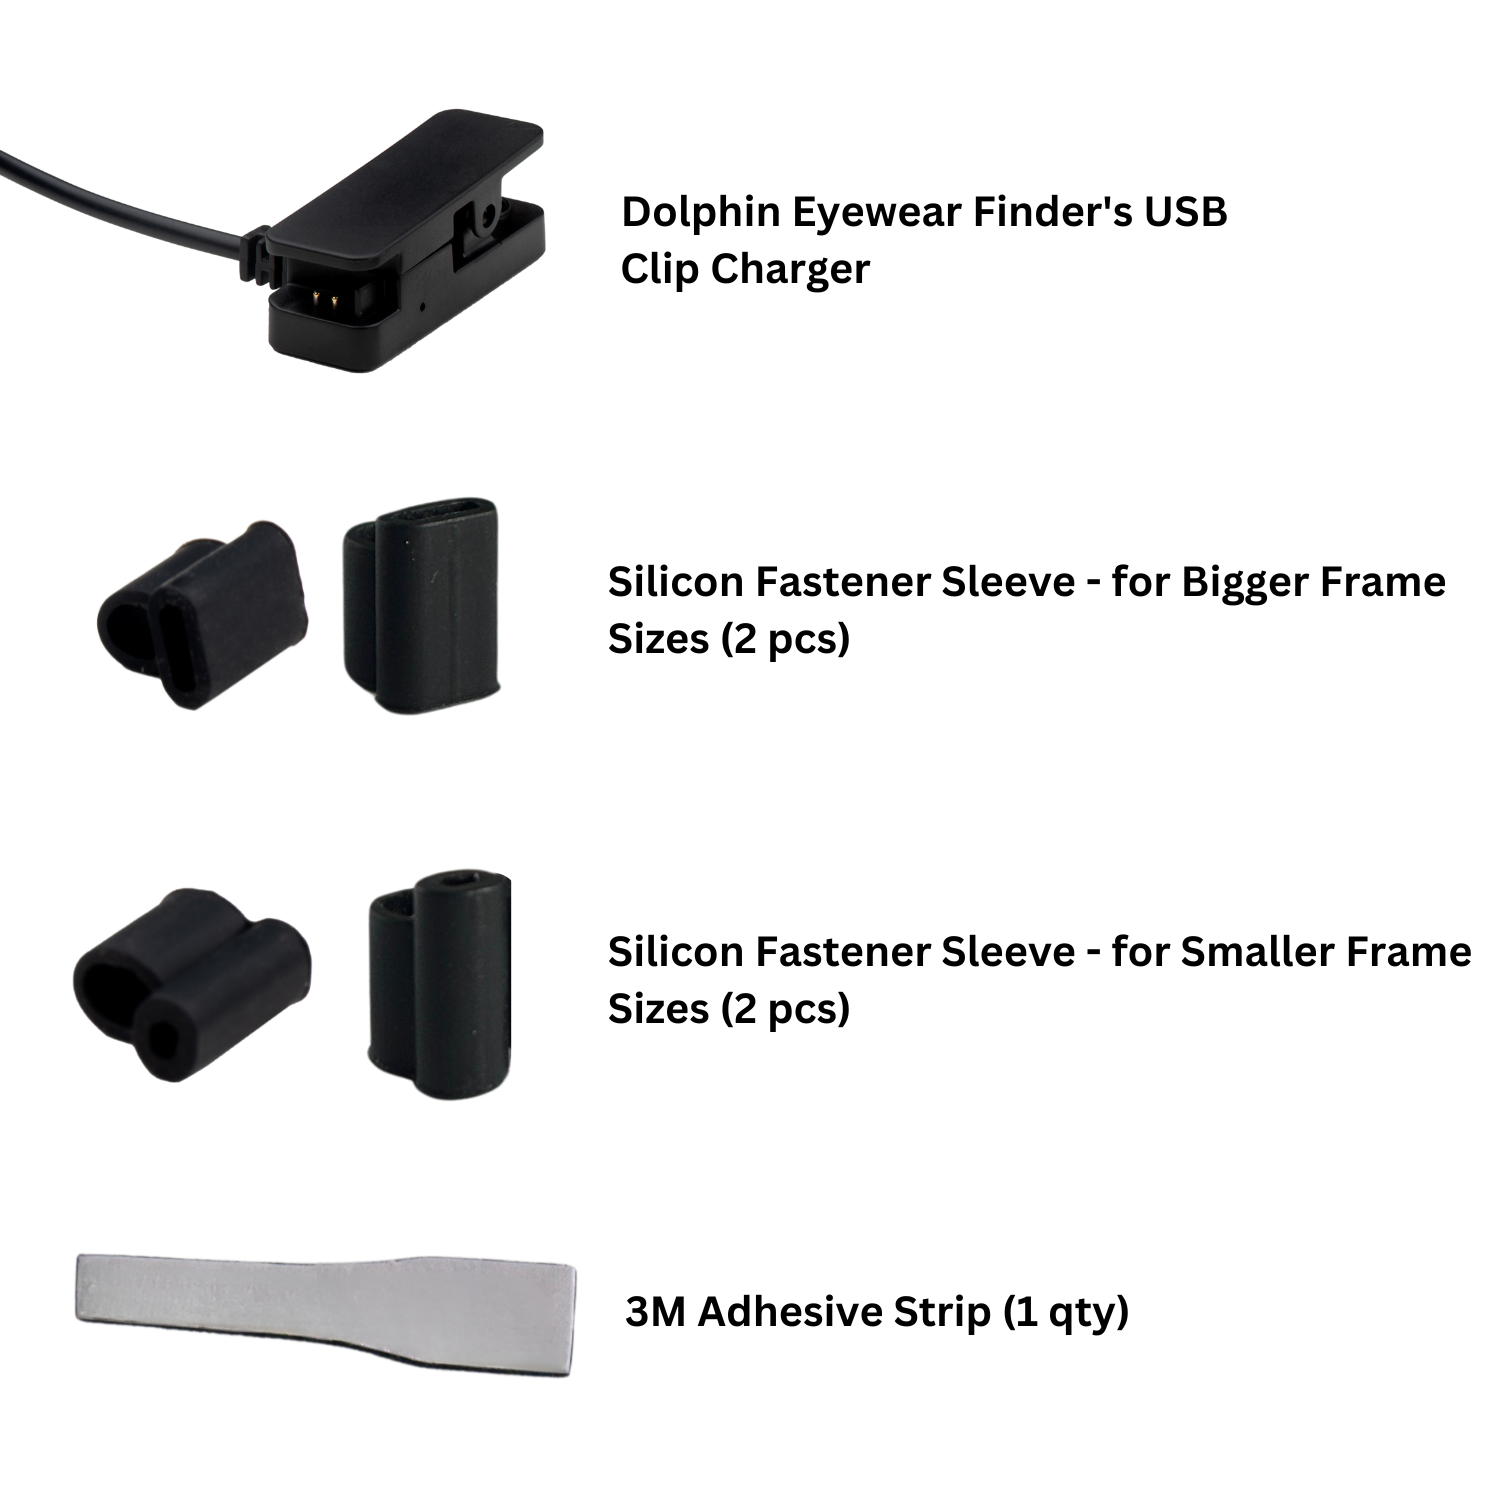 Dolphin Eyewear charger Accessory Kit - tag8